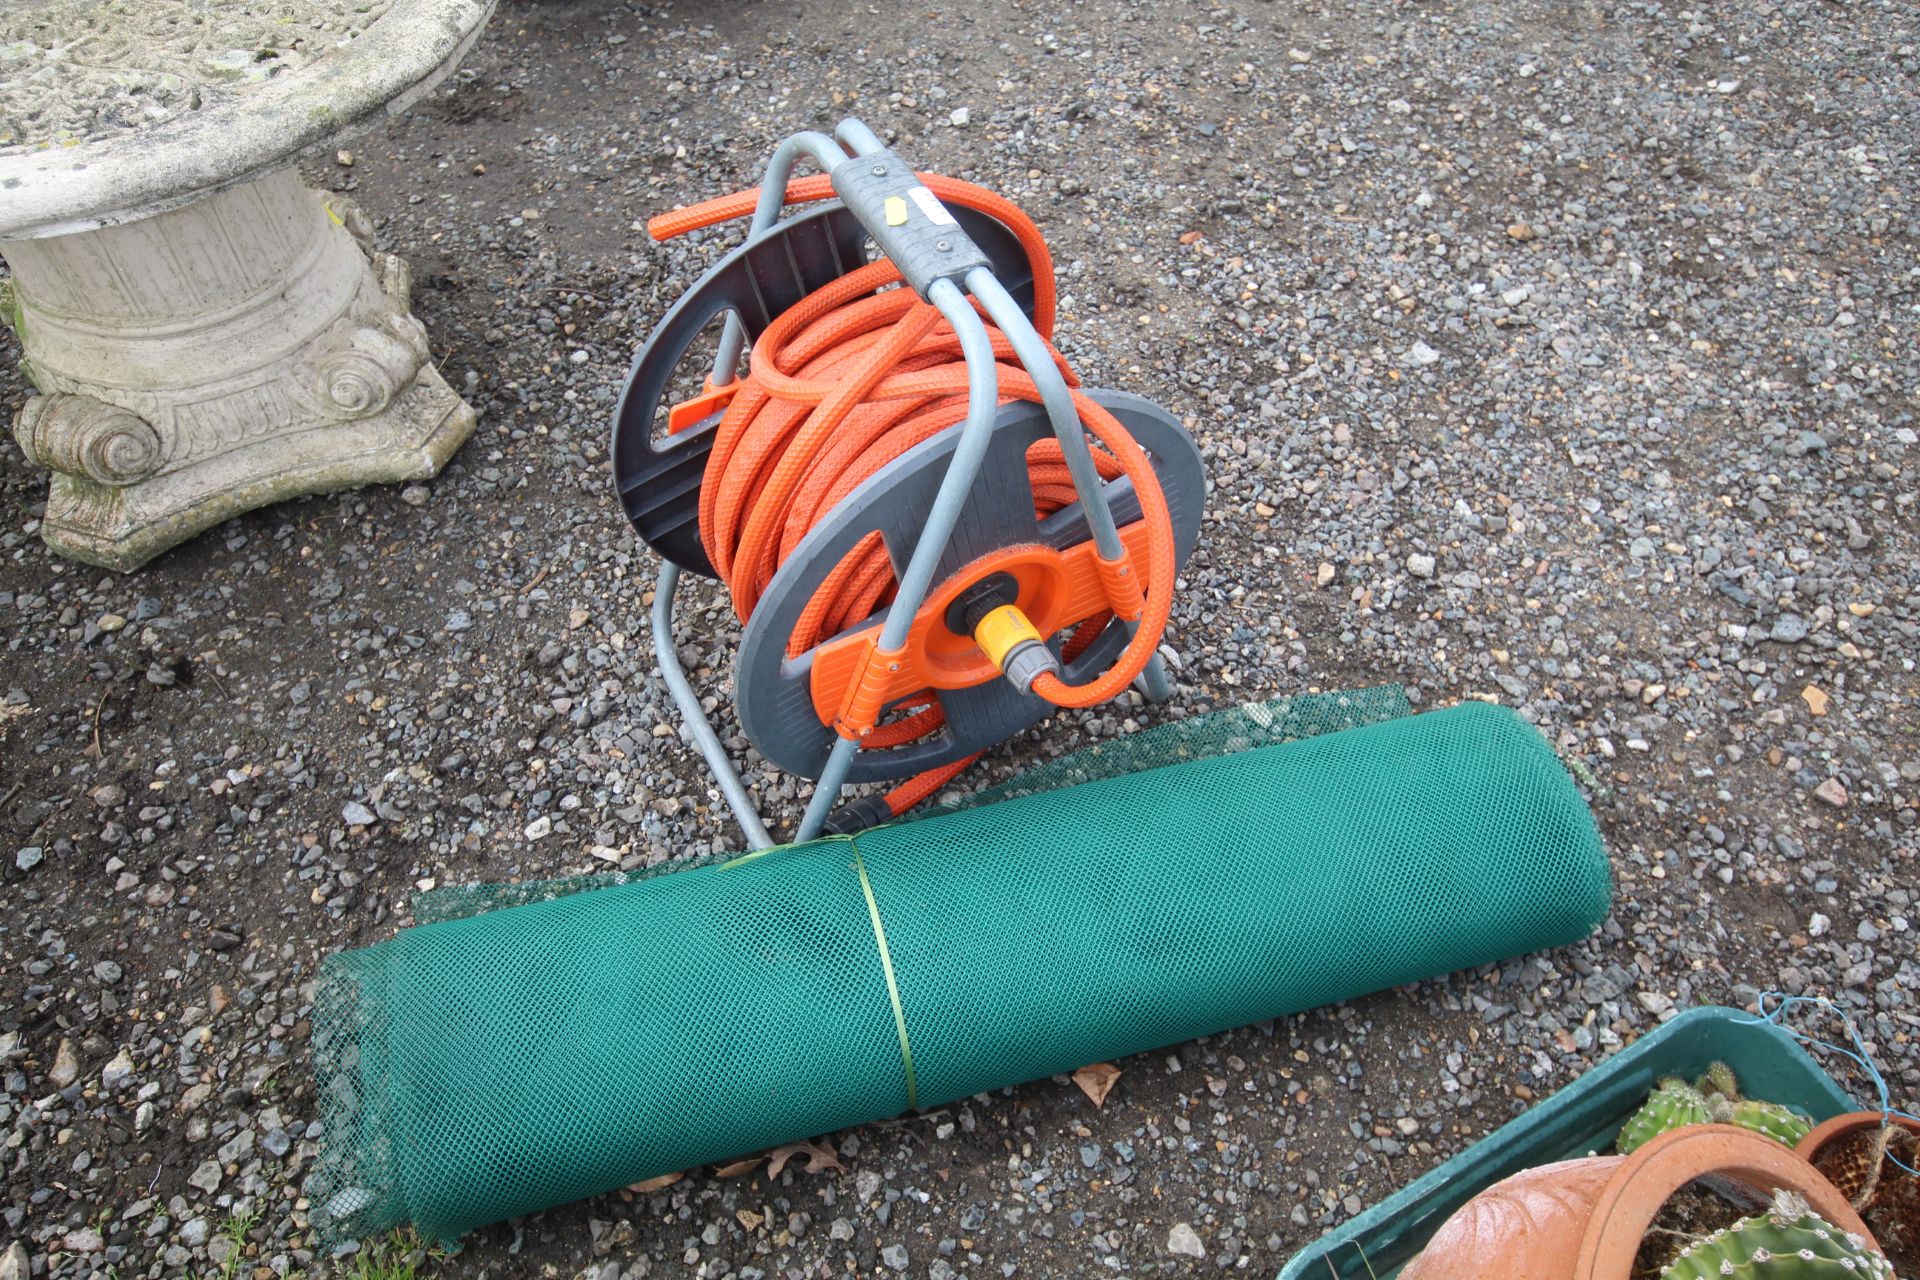 A length of garden hose on a reel together with a - Image 2 of 2